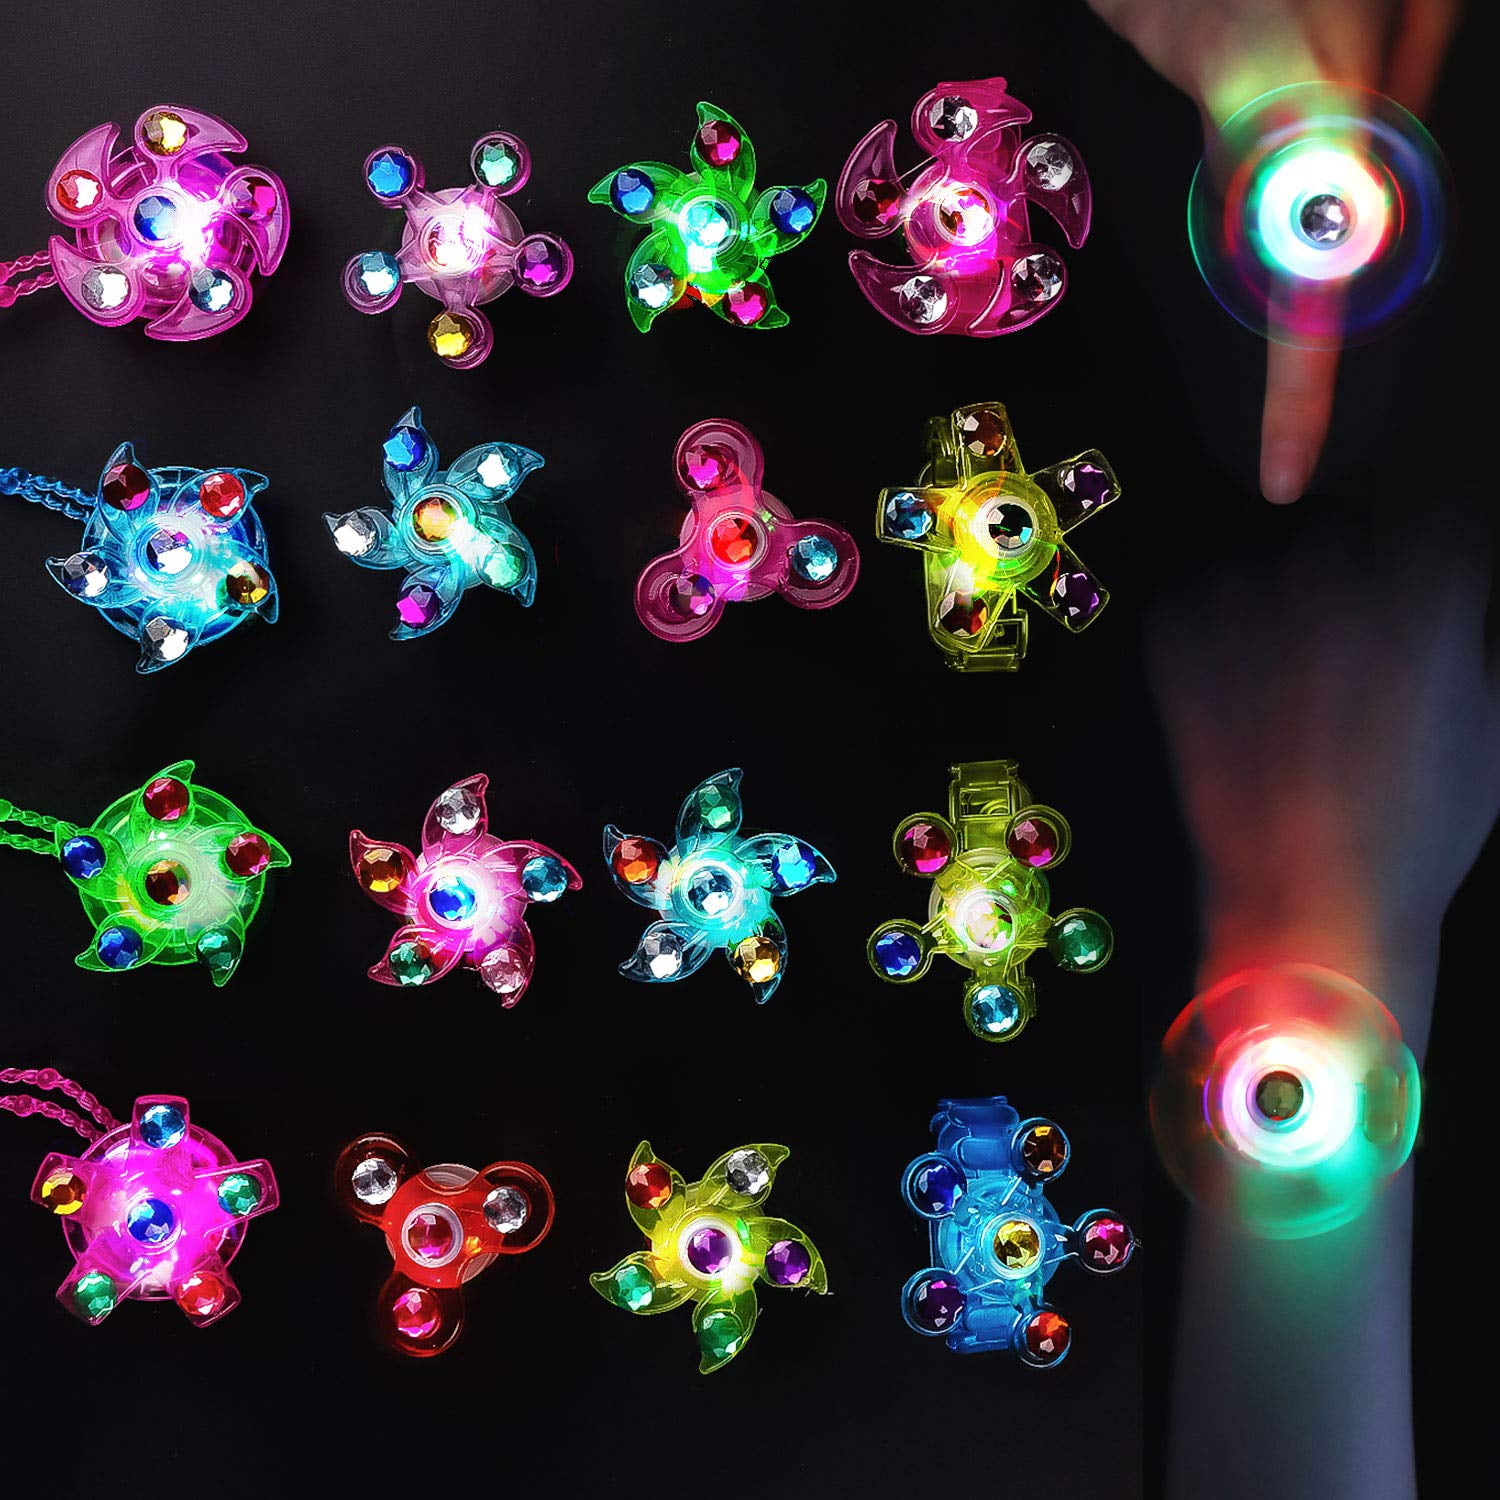 24 Pack 24 Pack LED Party Favors for Kids Prizes Glow in The Dark Party Supplies Light Up Necklaces Bulk Hand Spin Stress Relief Anxiety Toys for Girls Boys Birthday Campfire Party 